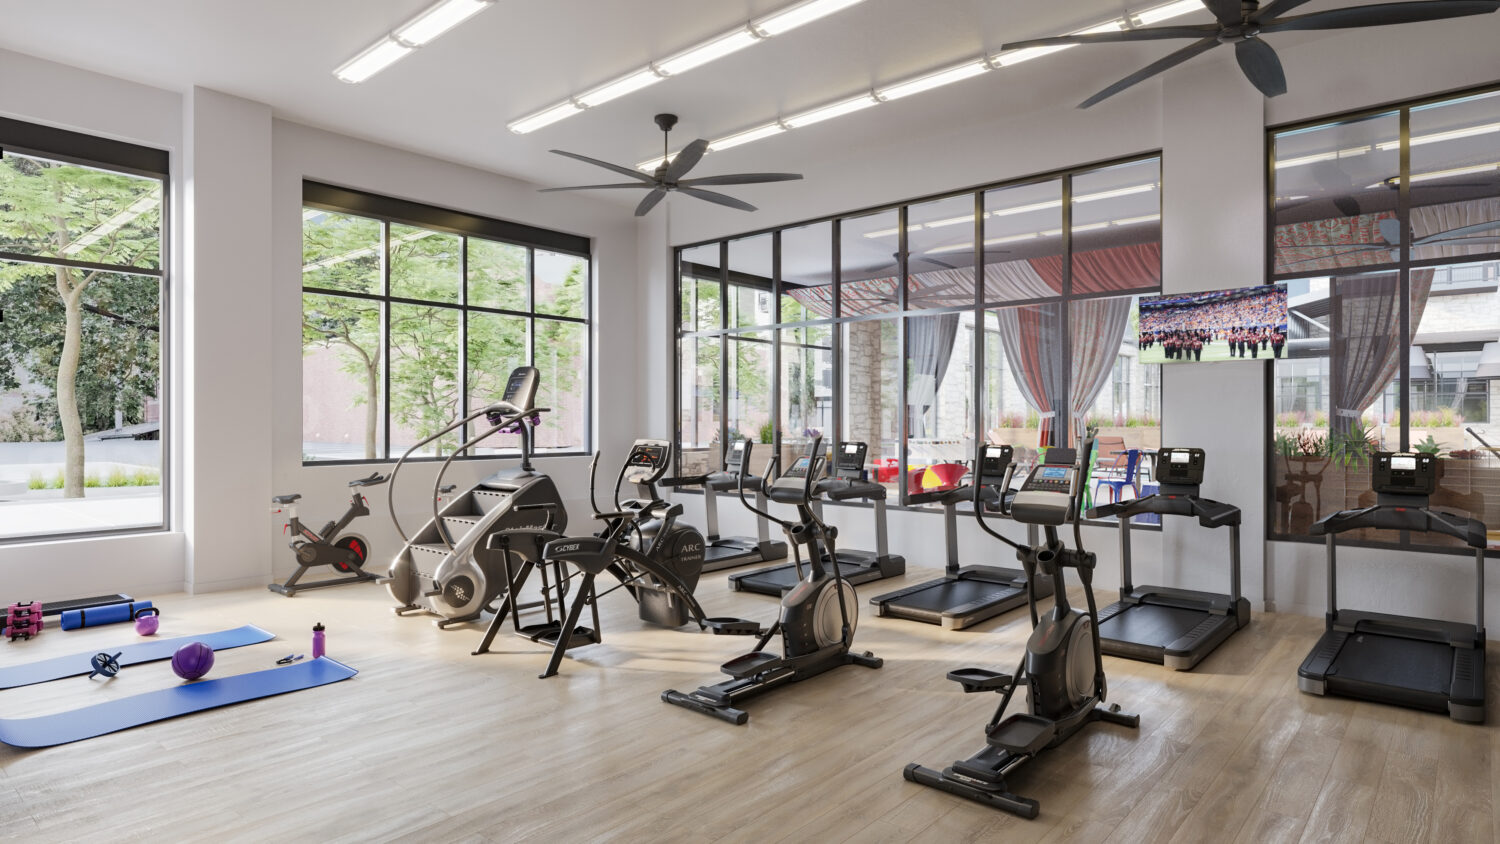 Fitness center with cardio machines, yoga mats, treadmills, and ceiling fans